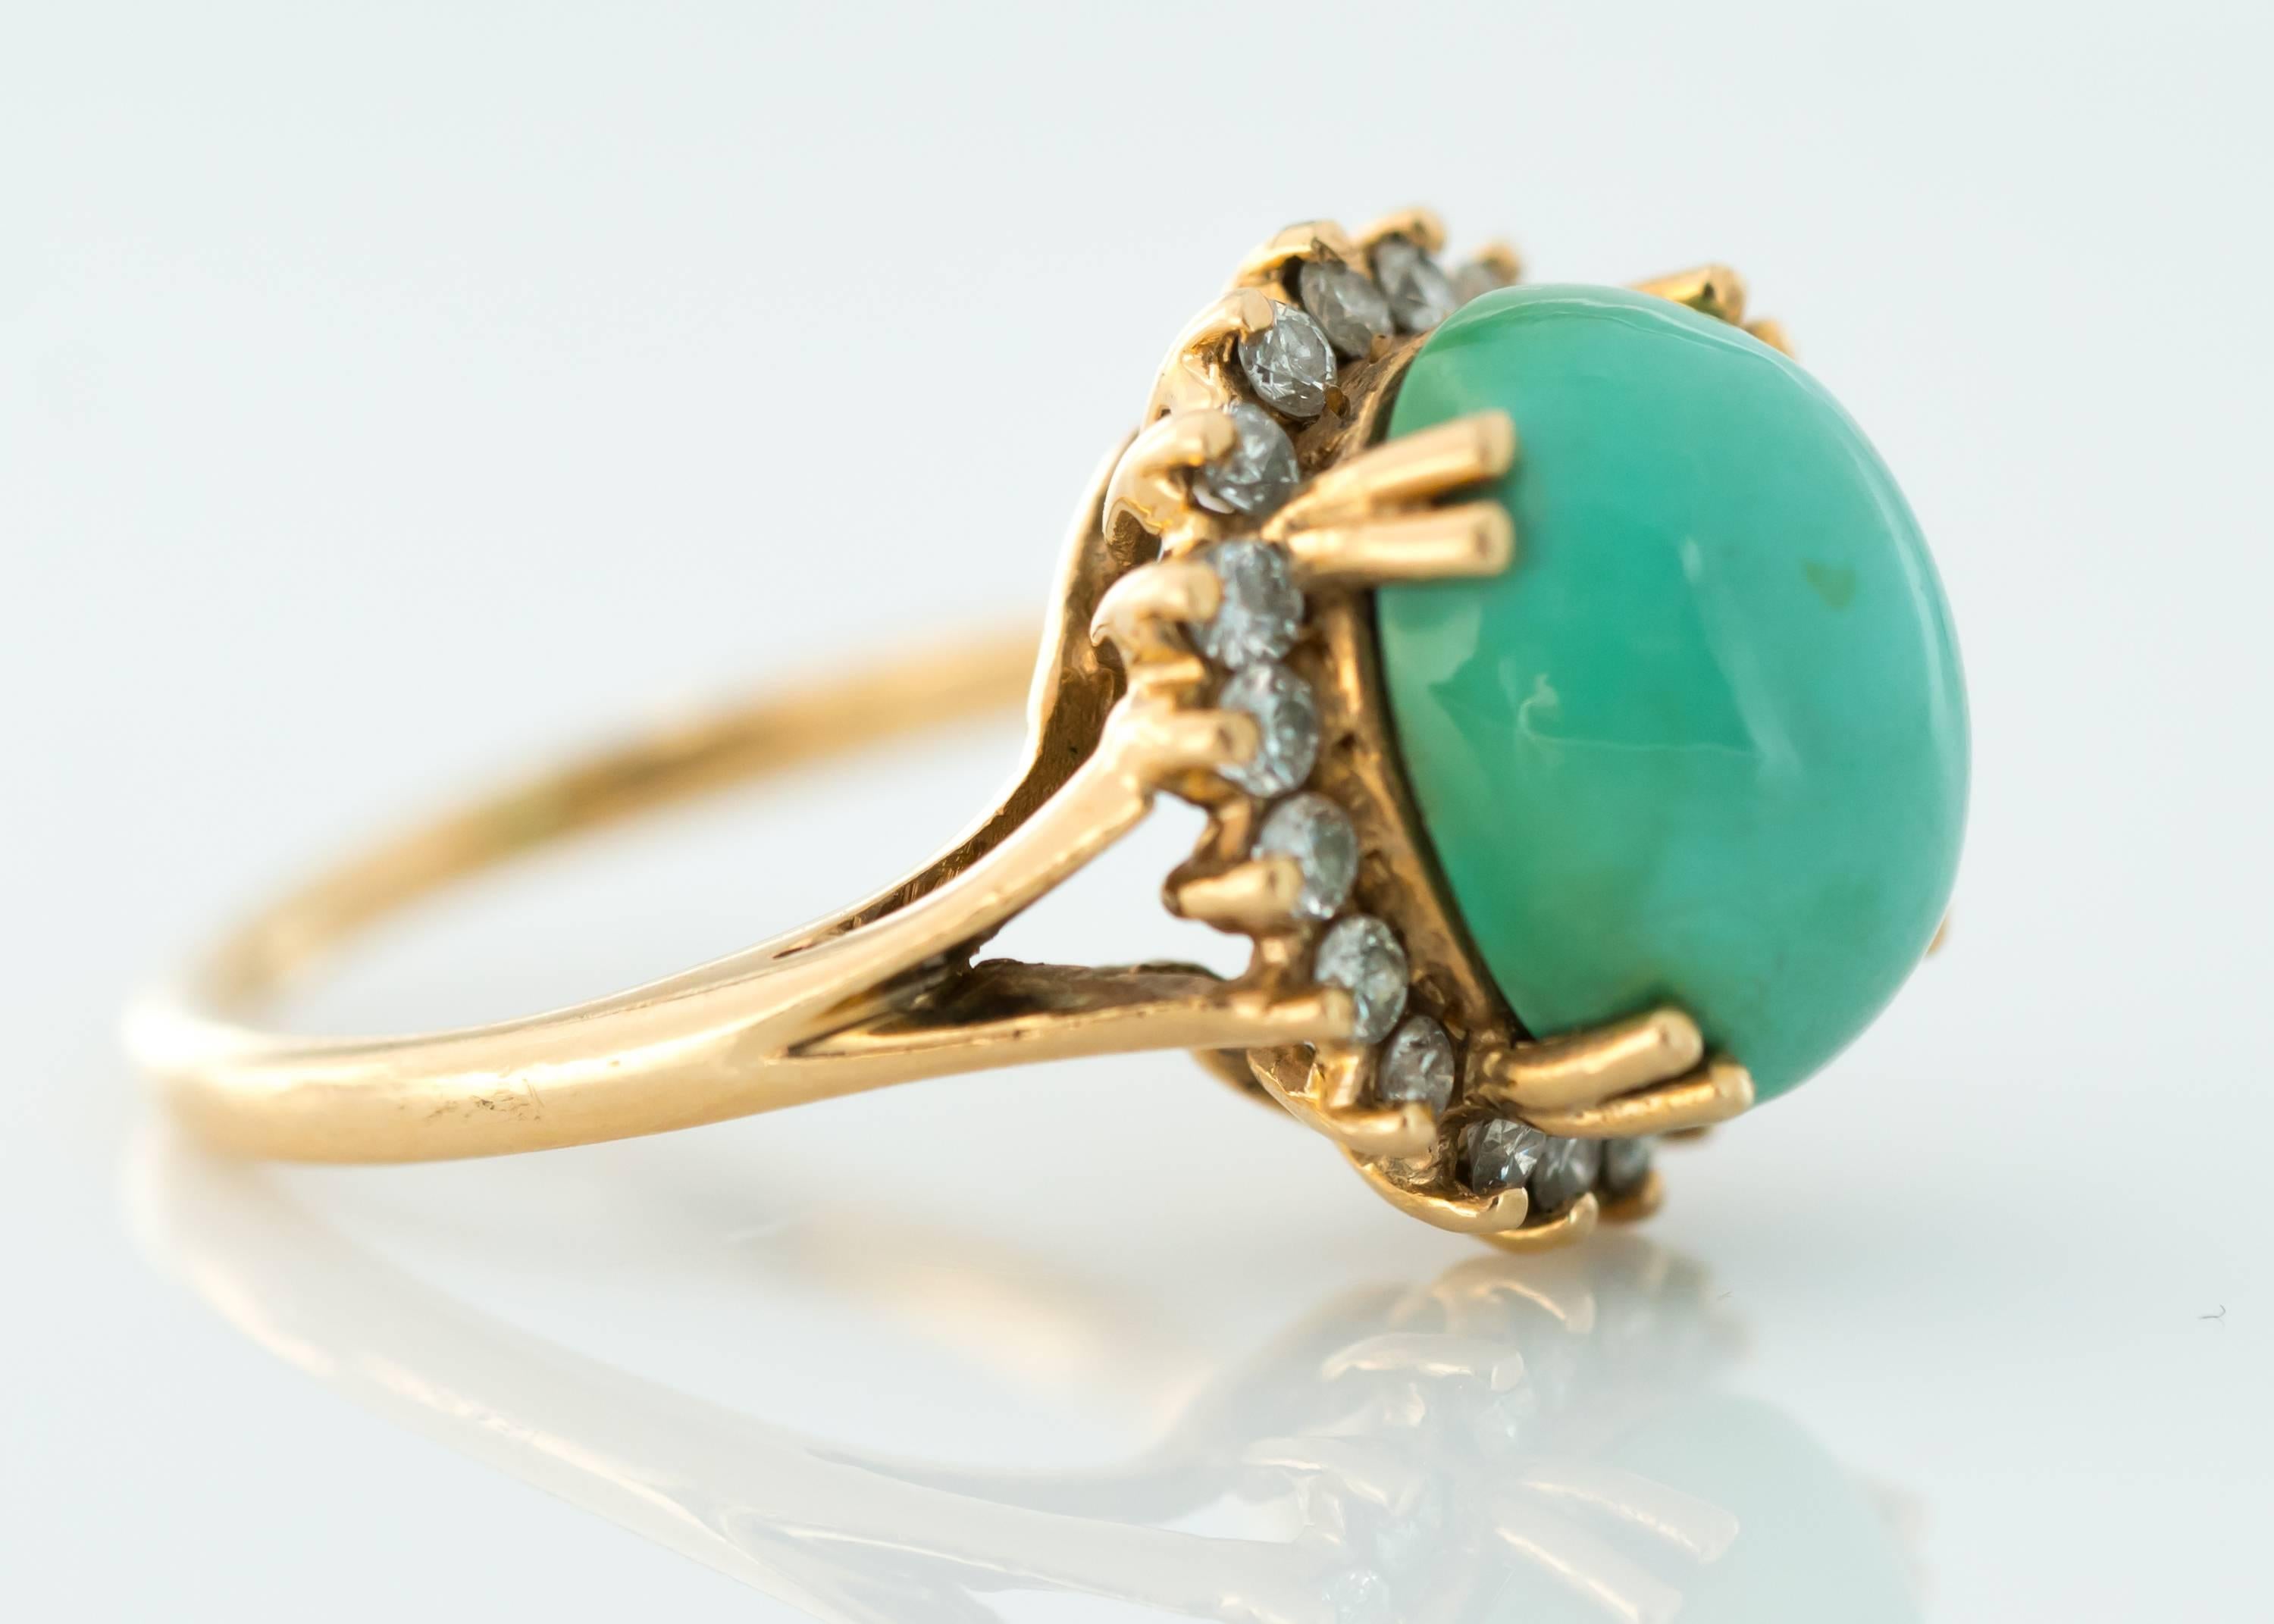 Tiffany and Co. Persian Turquoise Cabochon, Diamond Halo and 14 Karat Yellow Gold Ring

Features a 12 millimeter by 10 millimeter Persian Turquoise Cabochon securely set with 4 double prongs. A Diamond Halo frames the stunning center stone.